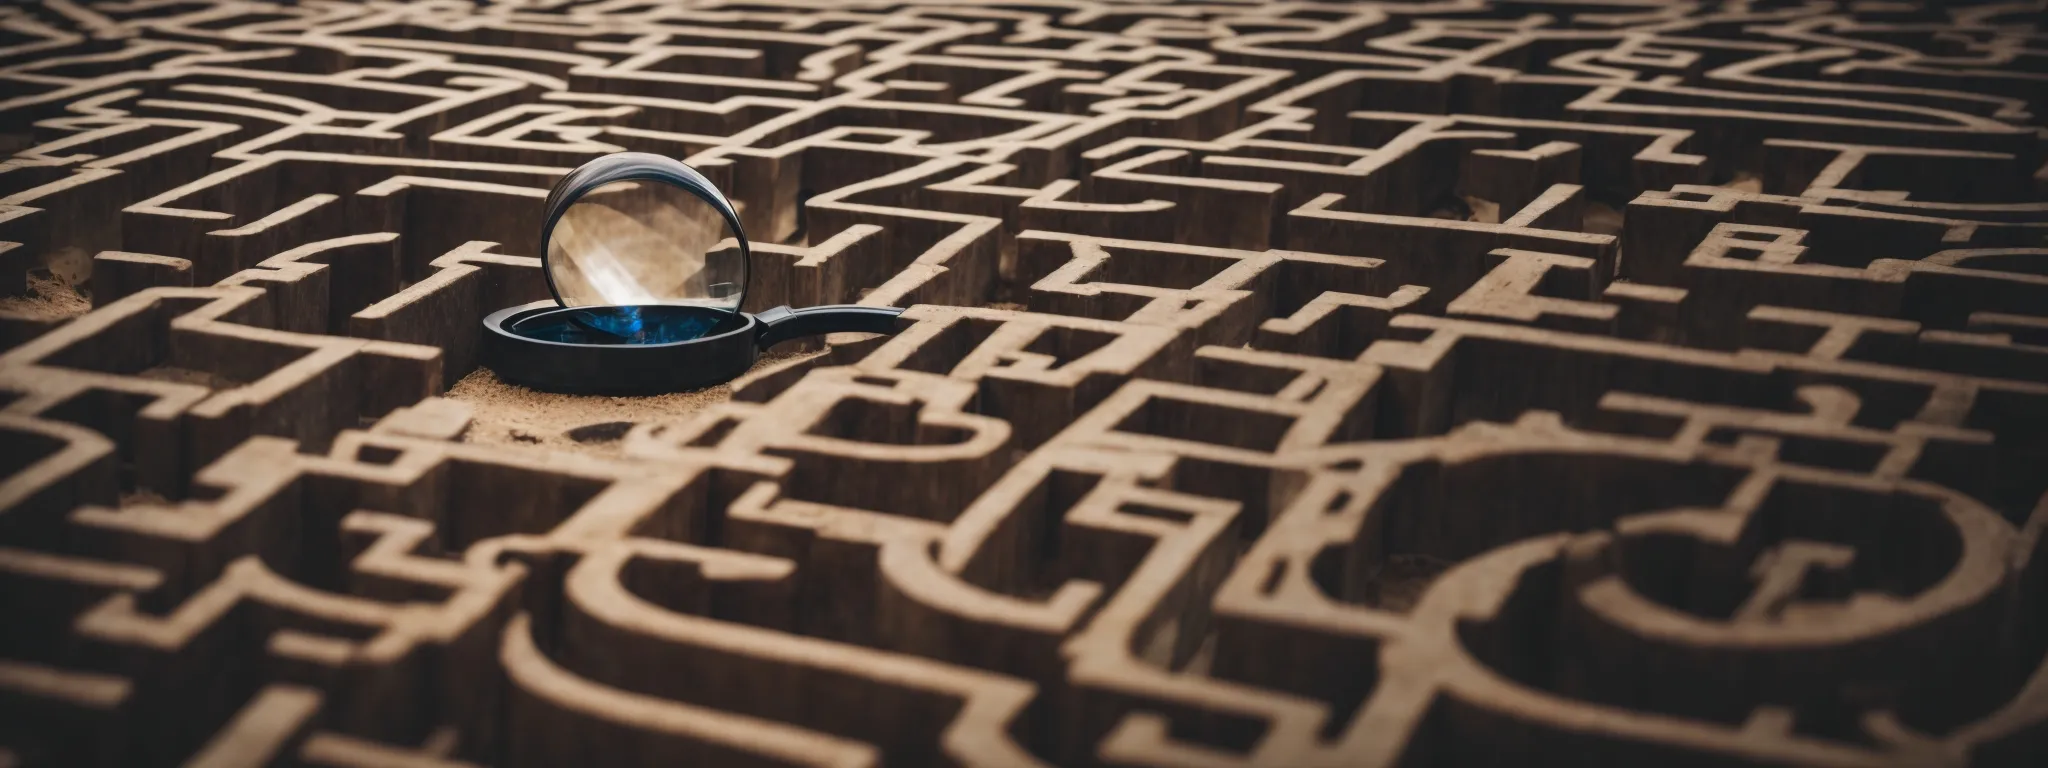 a magnifying glass hovering over a maze, symbolizing the discovery of hidden paths and solutions.